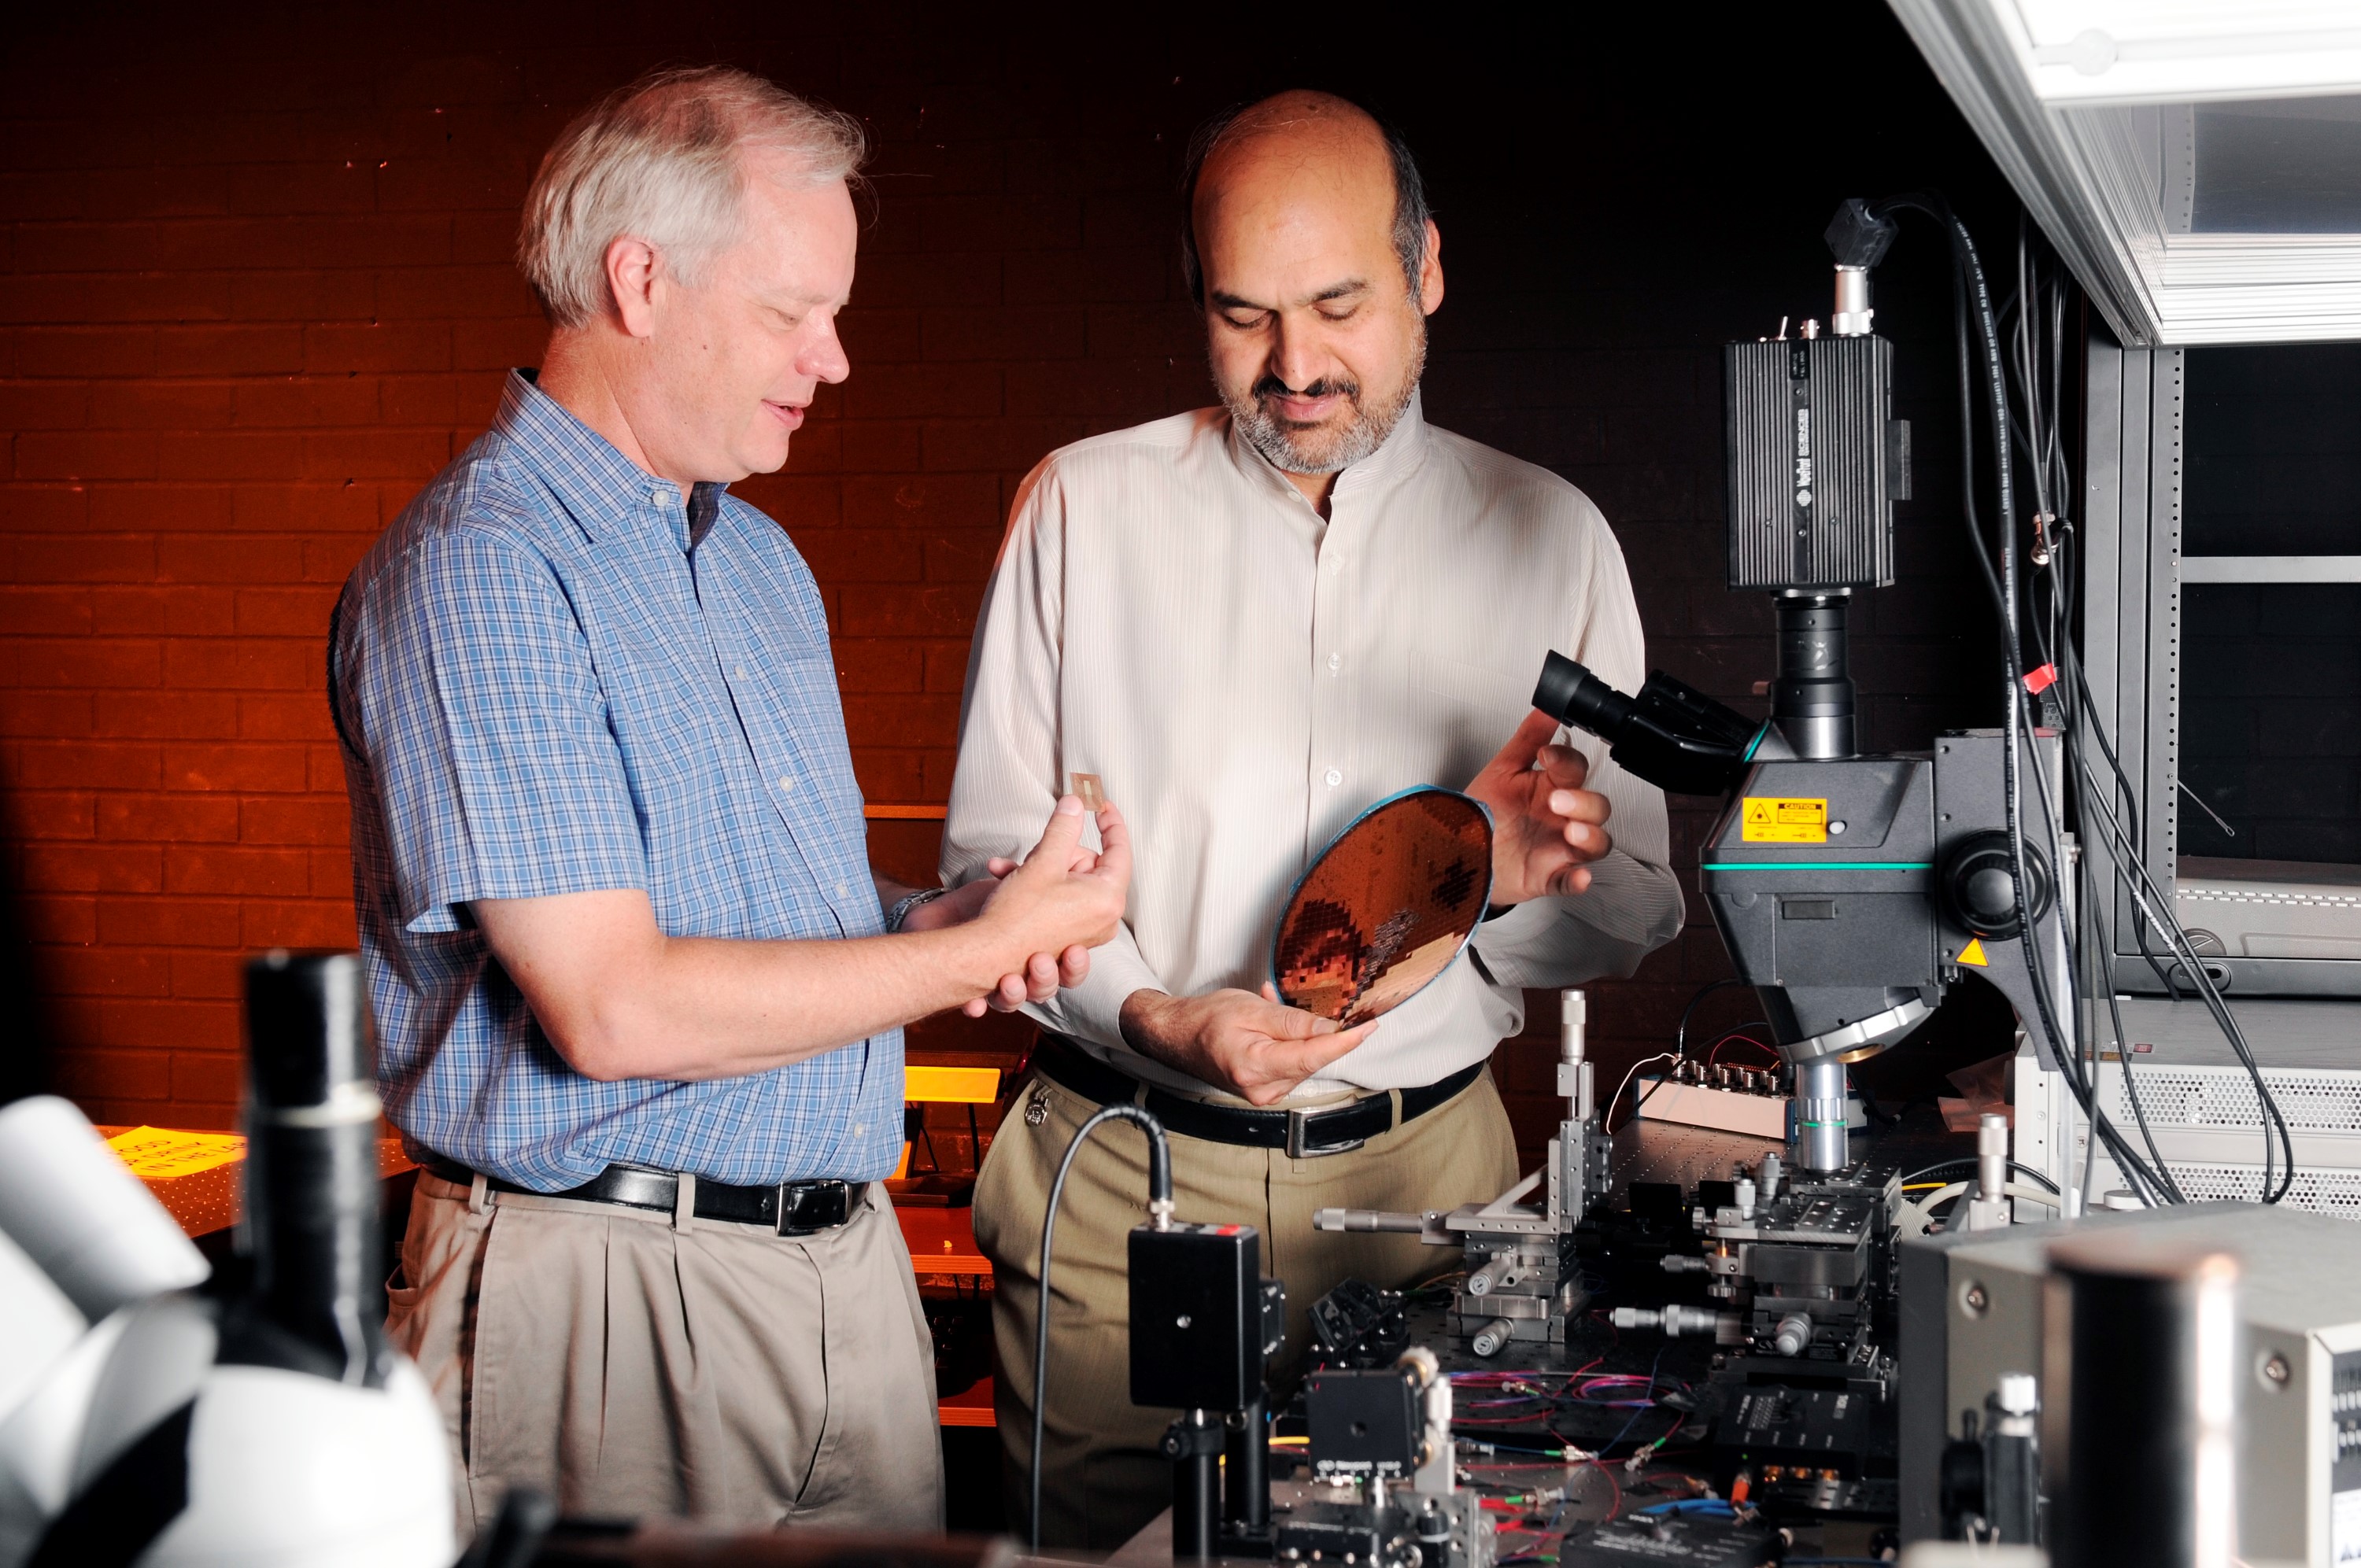 Professor Ken Sandhage, left, and Professor Ali Adibi examine a sensing device and a silicon wafer in a laboratory at Georgia Tech. (Credit: Gary Meek)